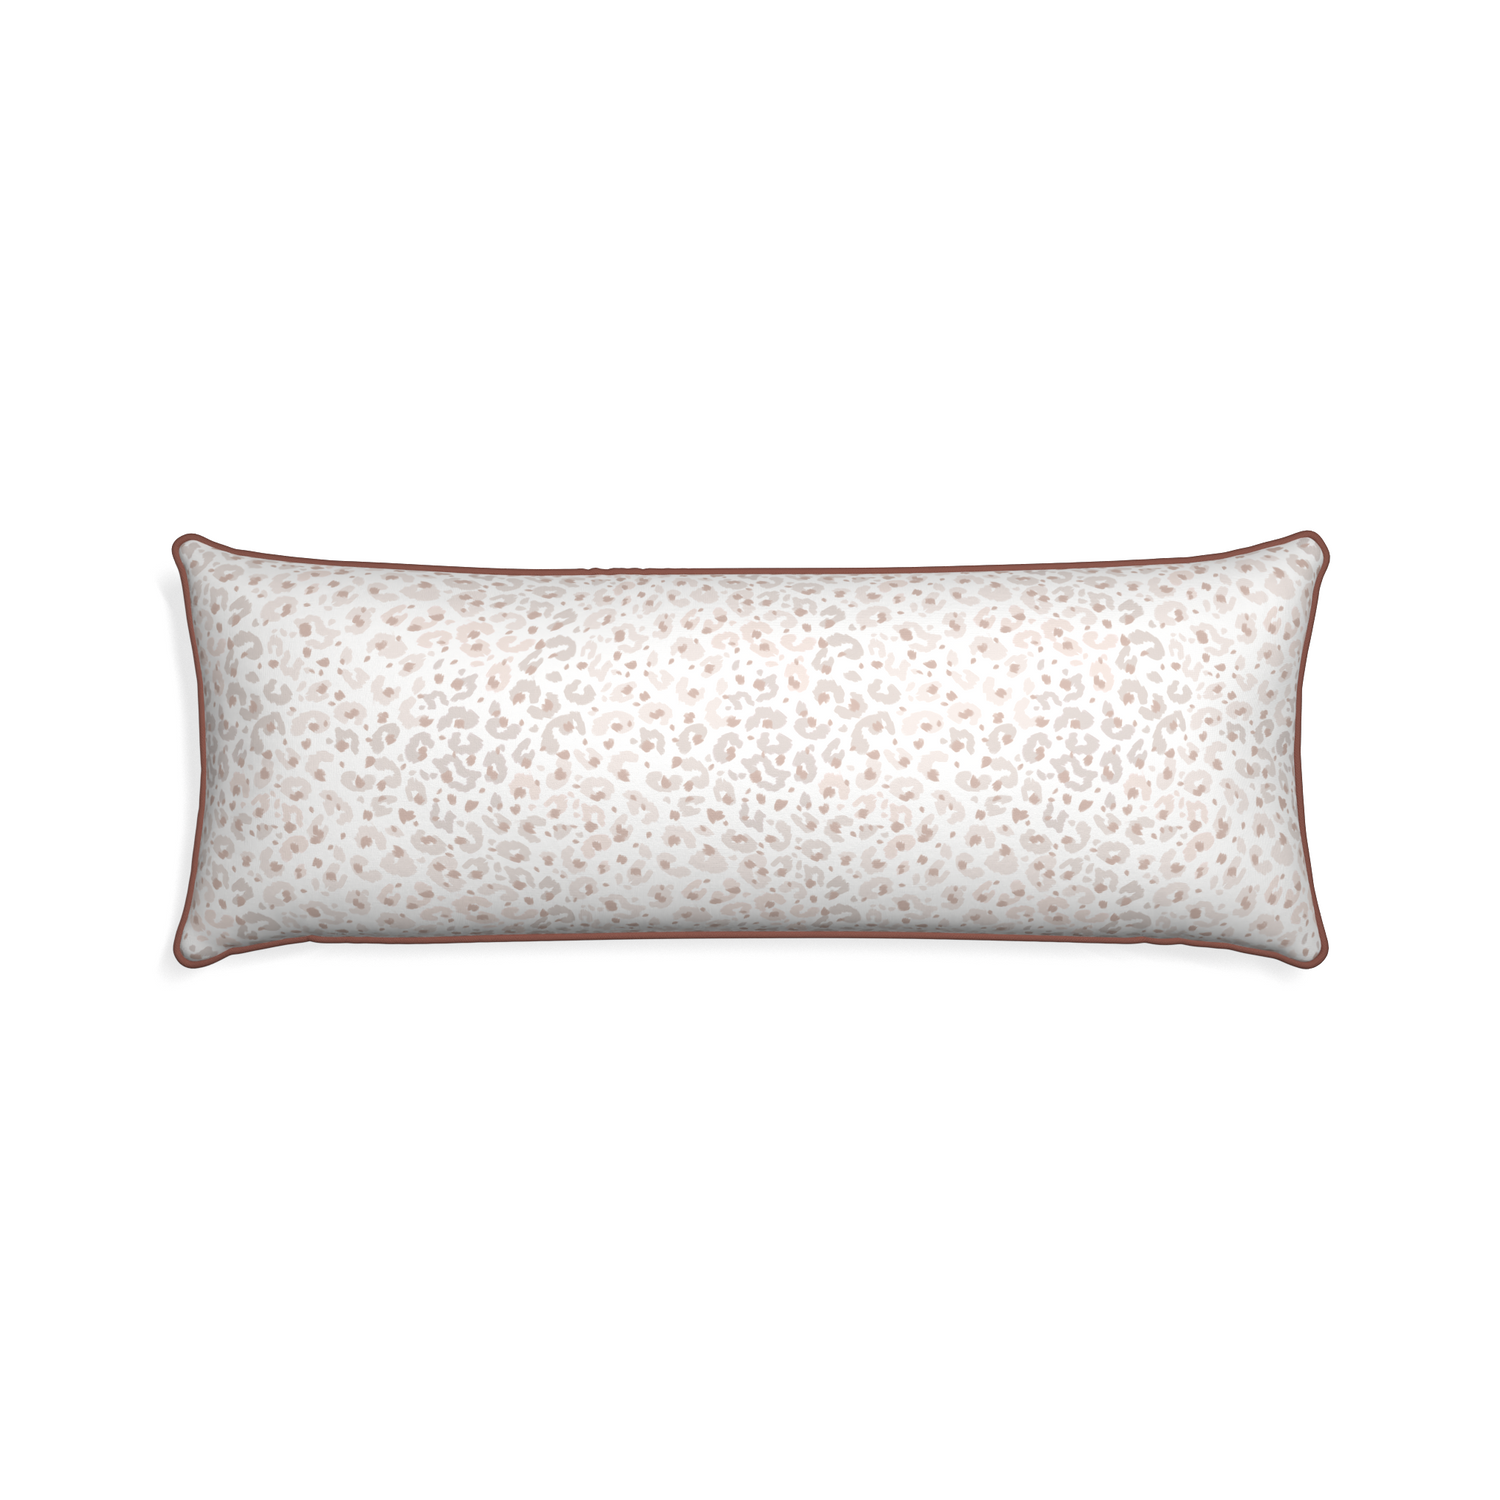 Xl-lumbar rosie custom pillow with w piping on white background